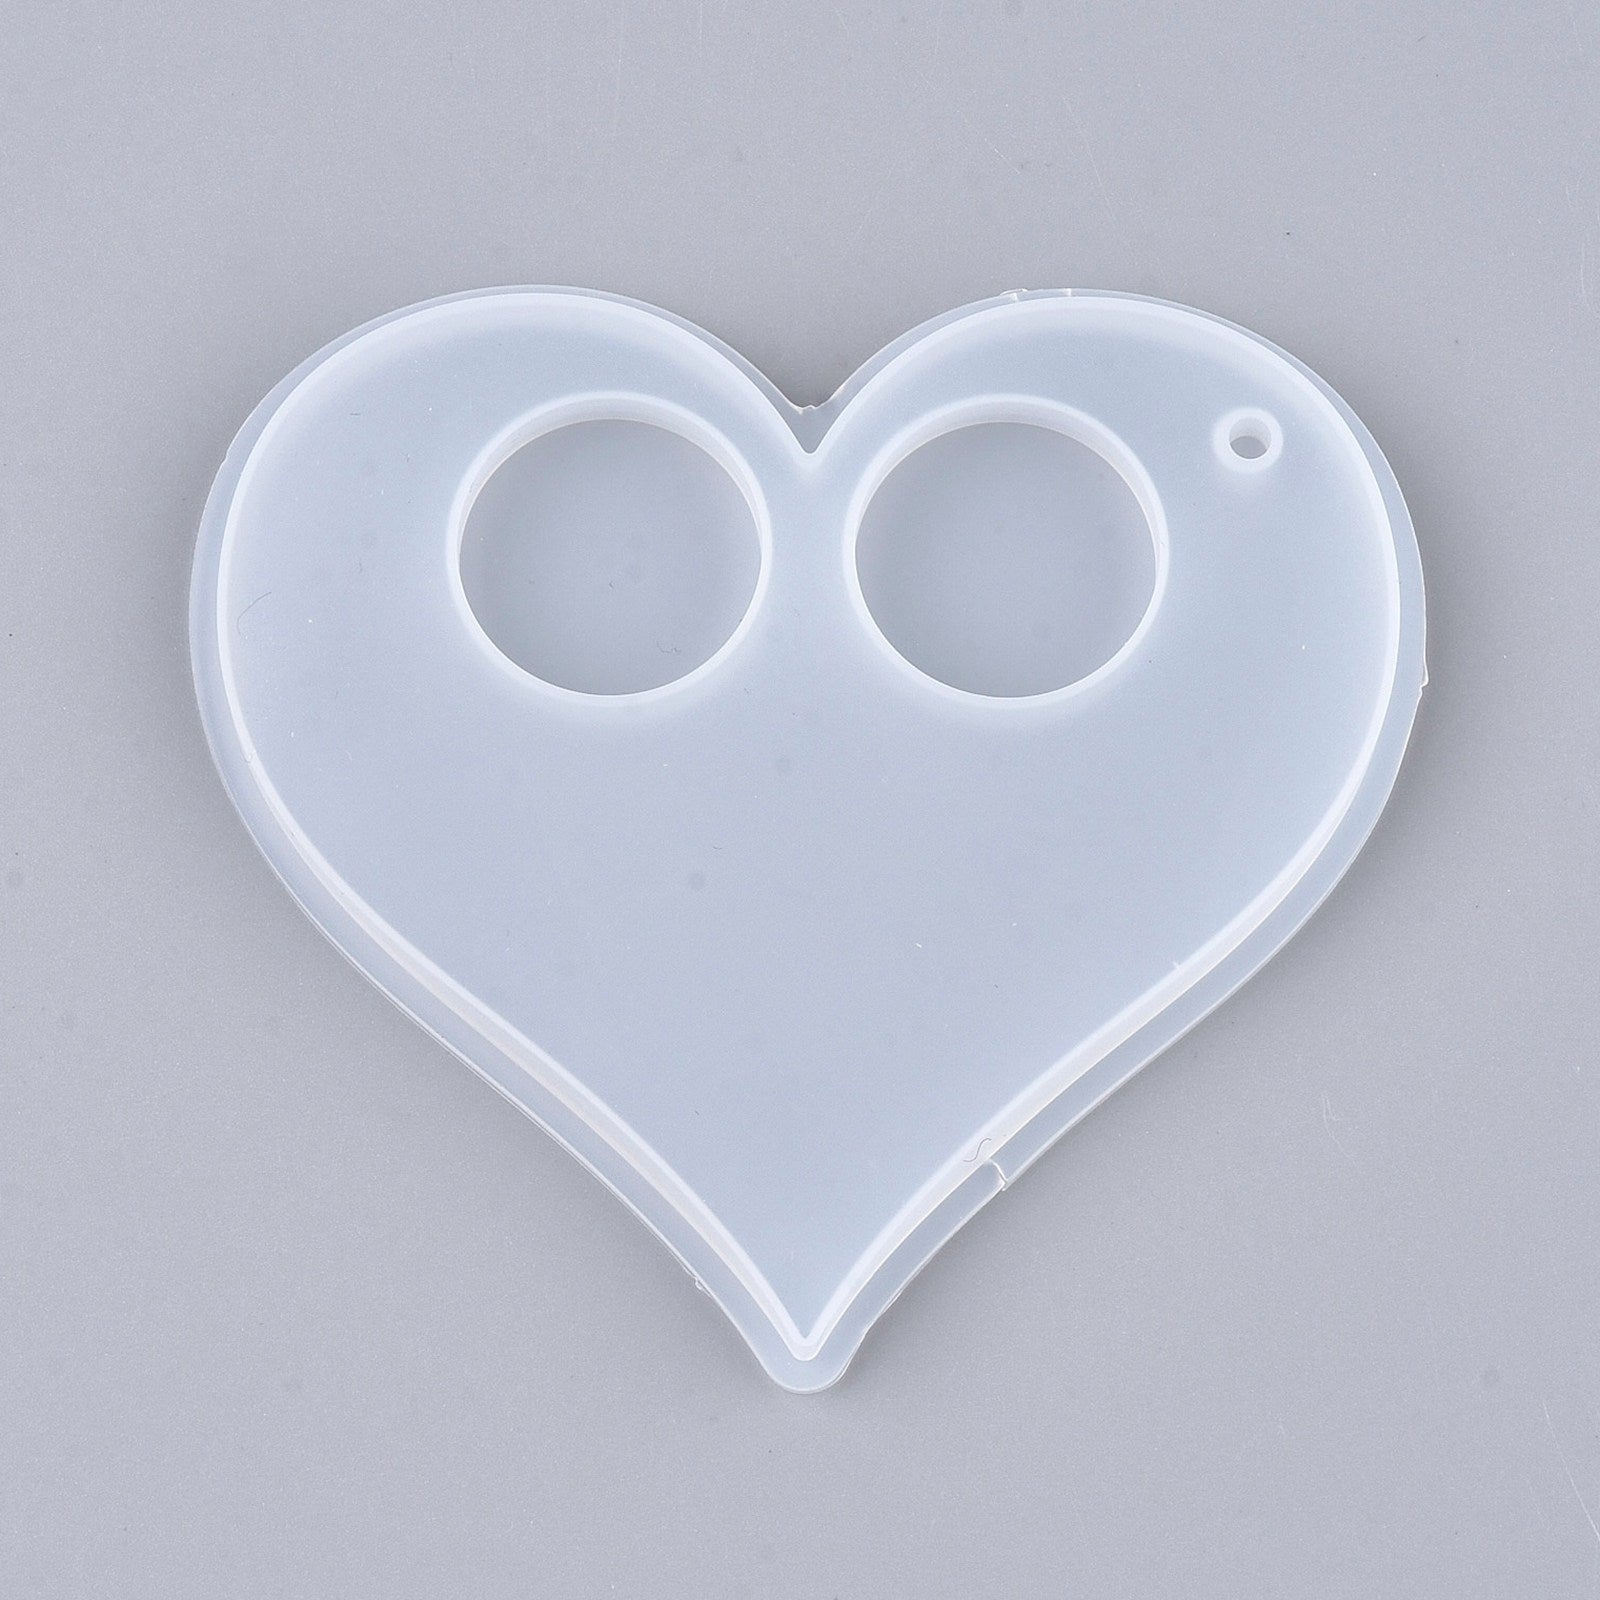 CRASPIRE DIY Heart Shape Earring Silicone Mold Kits, Include Brass